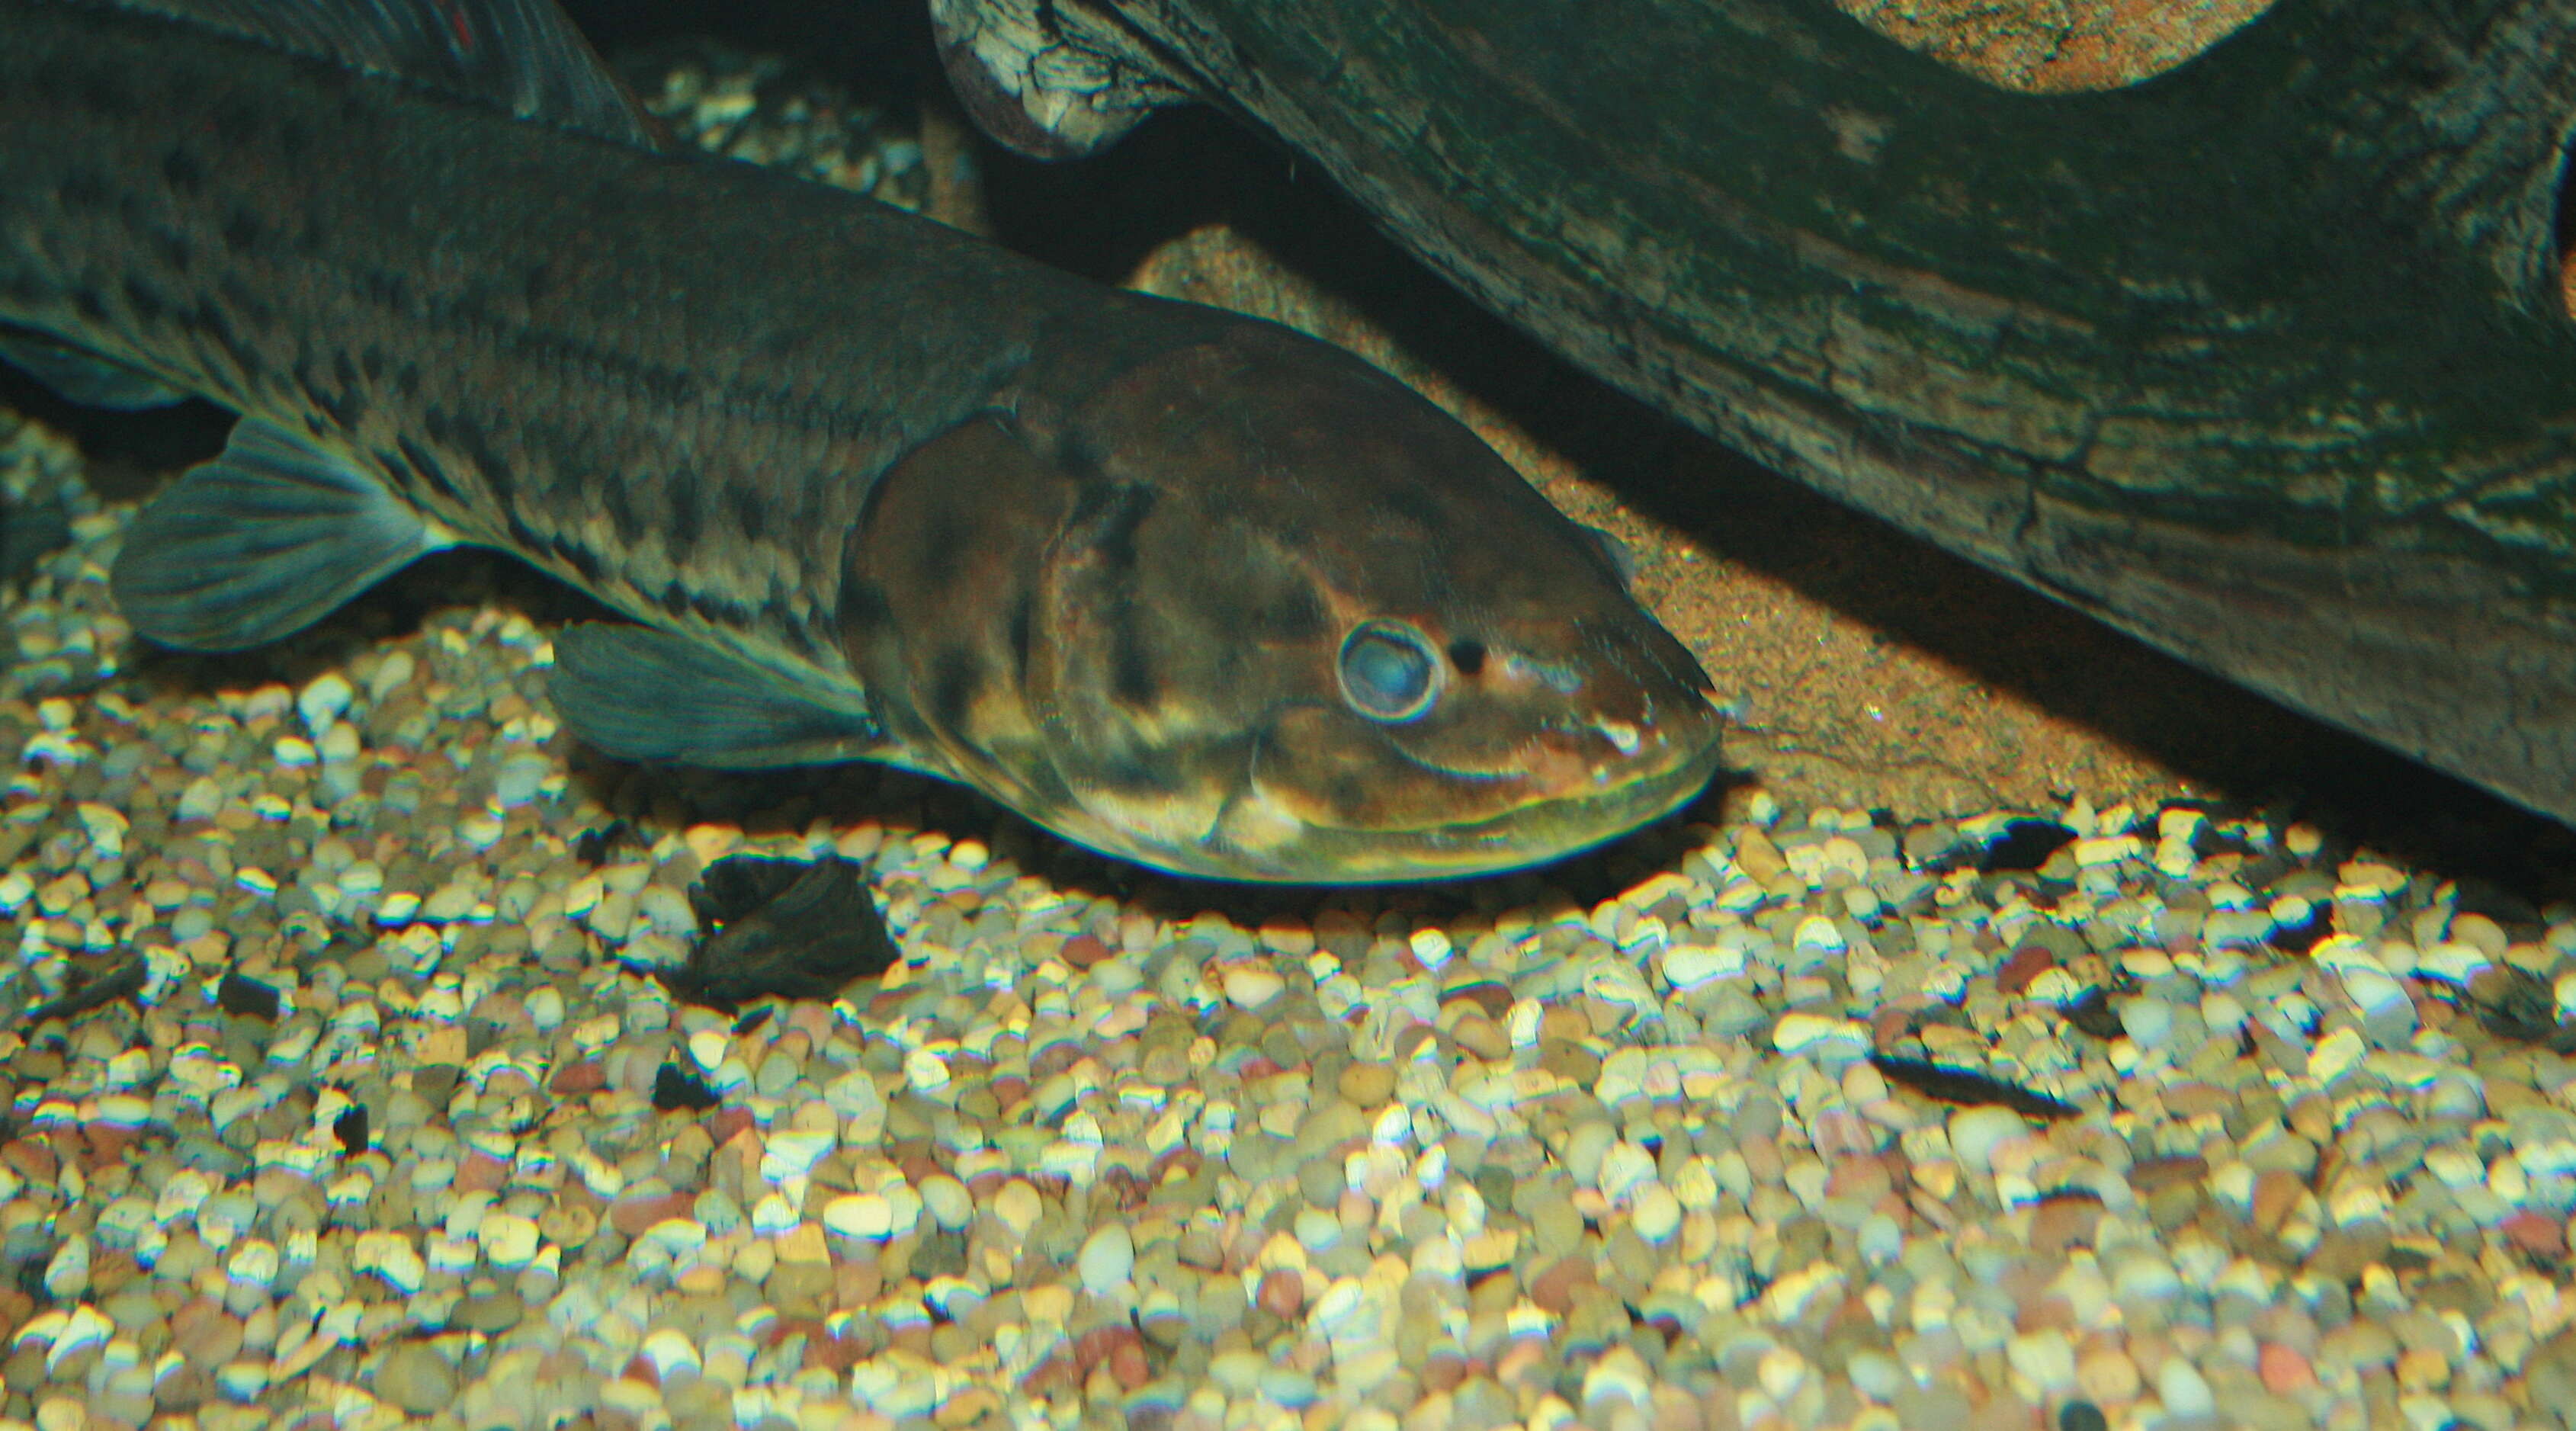 Image of bowfins